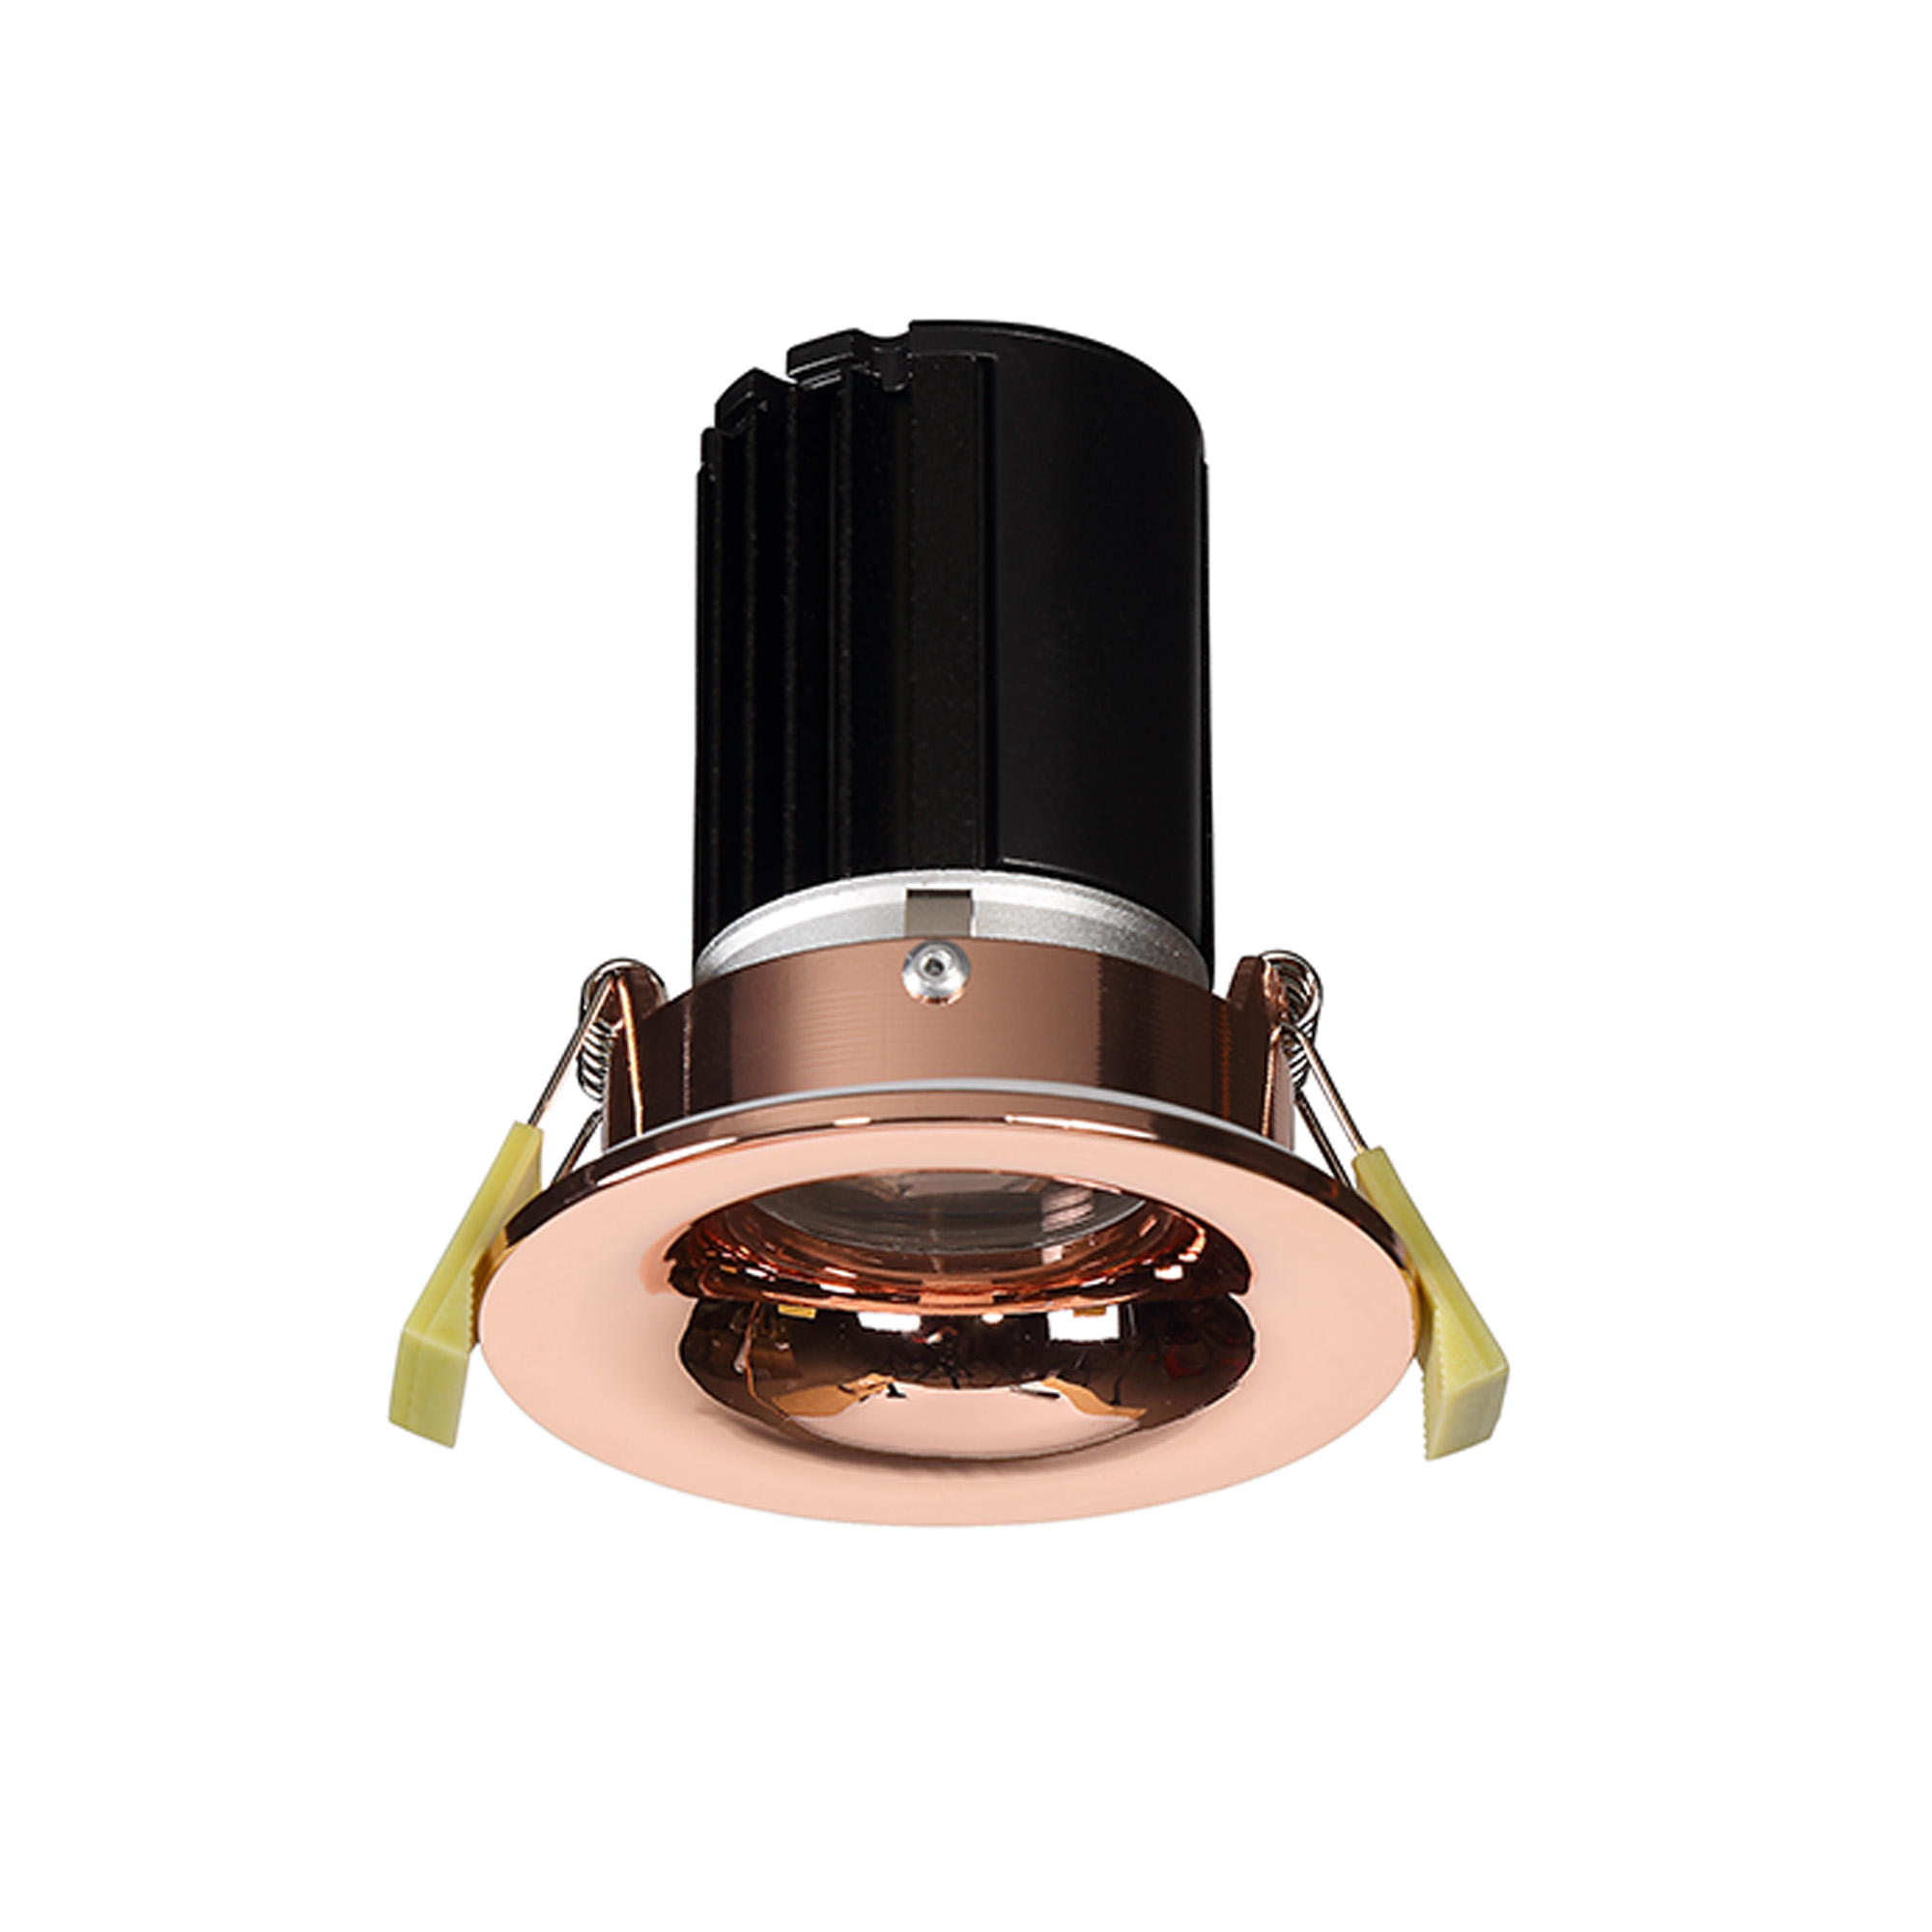 DM201570  Bruve 12 Tridonic powered 12W 2700K 1200lm 12° LED Engine;350mA ; CRI>90 LED Engine Rose Gold Fixed Round Recessed Downlight; Inner Glass cover; IP65